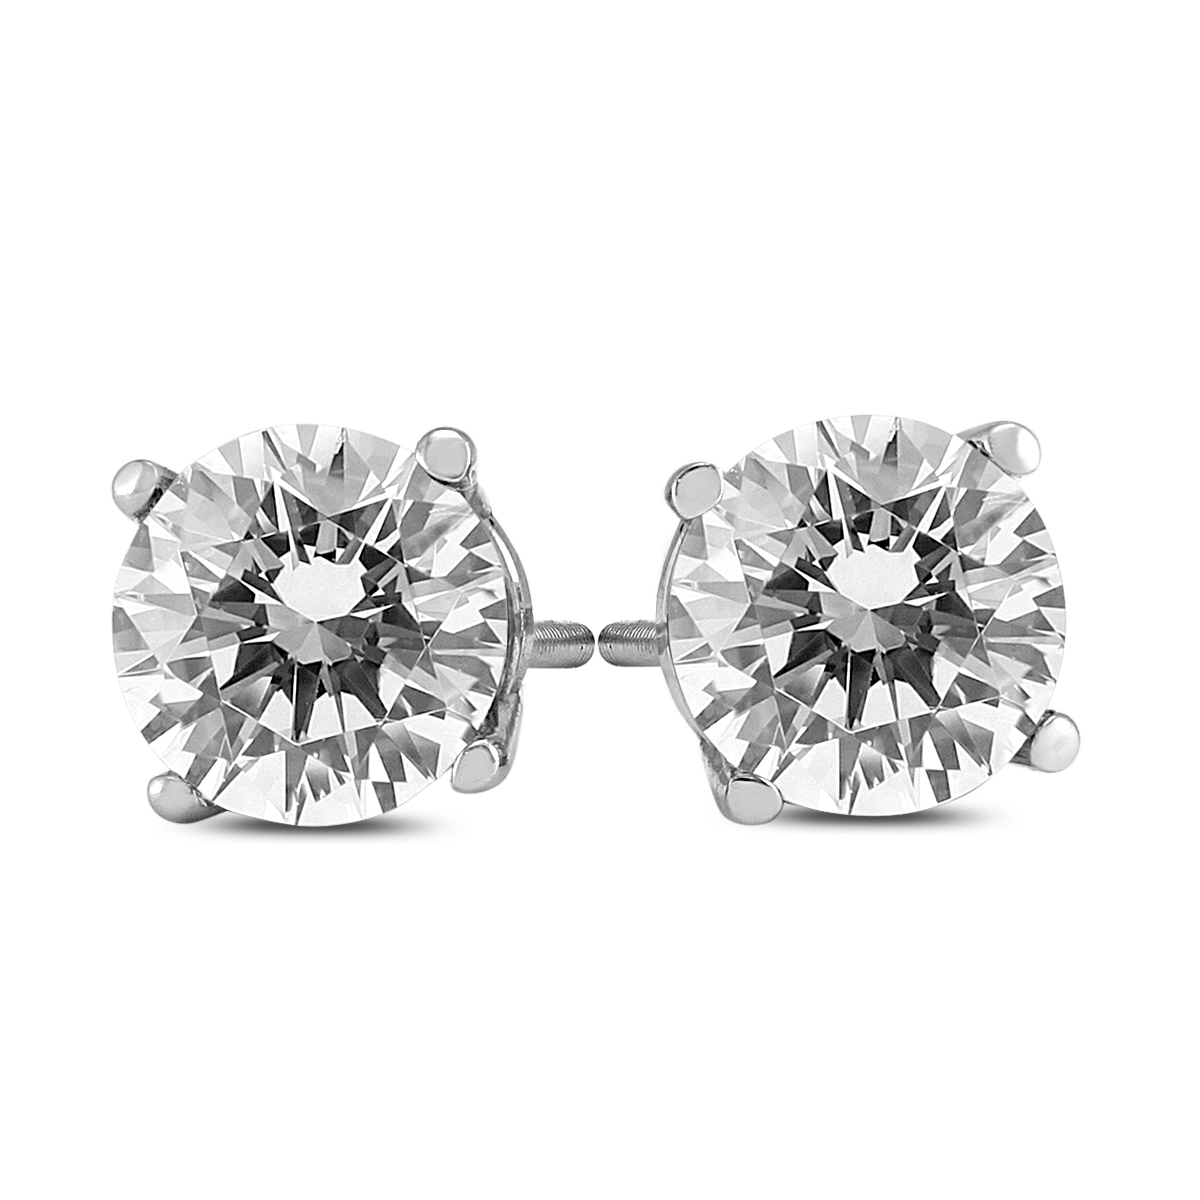 2 Carat TW AGS Certified Round Diamond Solitaire Stud Earrings in 14K White Gold (I-J Color, SI1-SI2 Clarity)